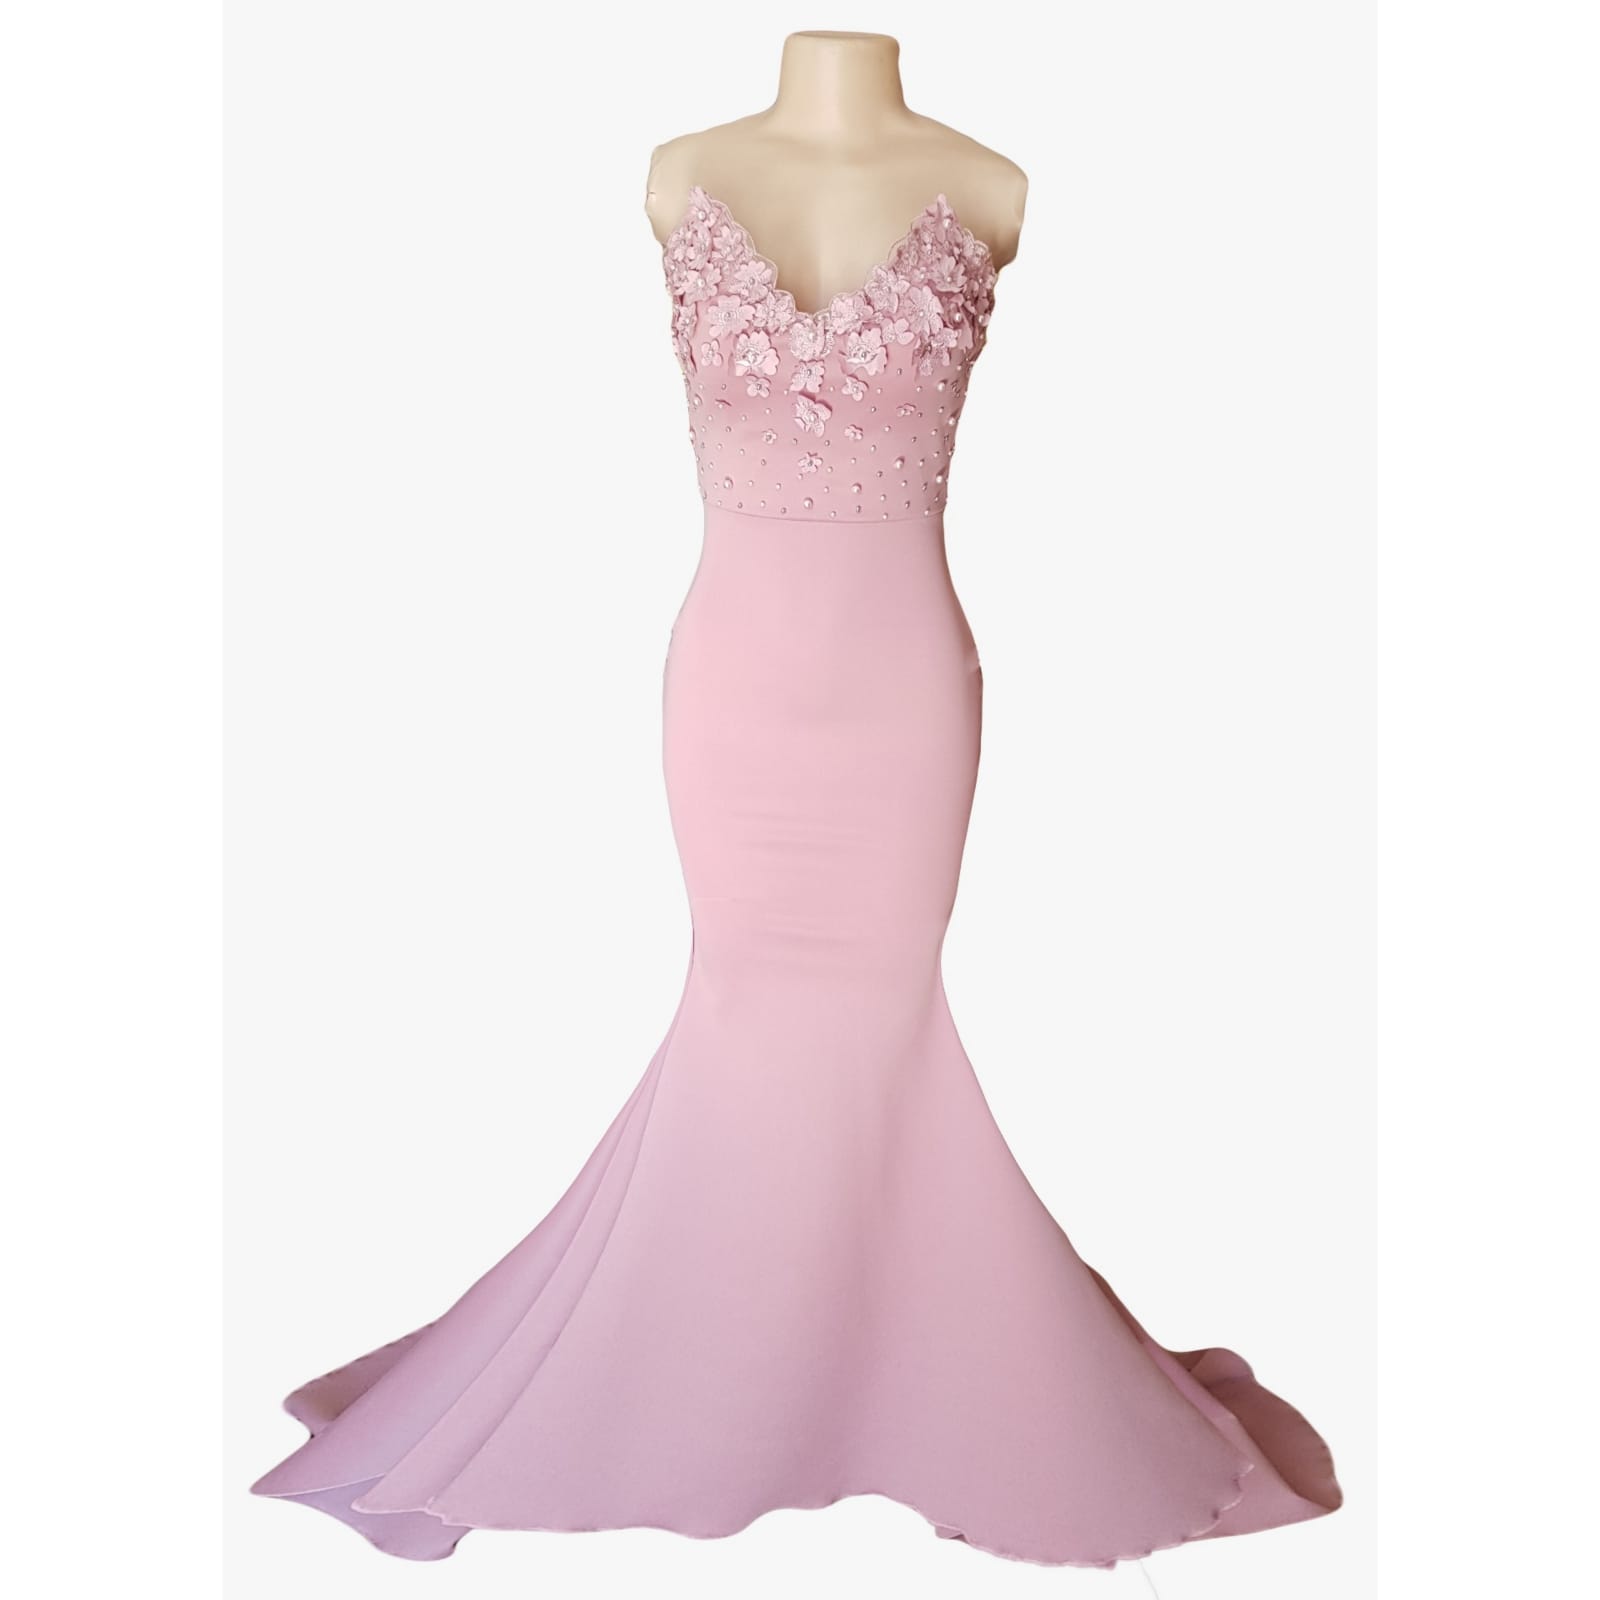 Pale pink soft mermaid prom dress 6 pale pink soft mermaid prom dress, bodice detailed with pearls and 3d lace, with a train and detachable neck strap.